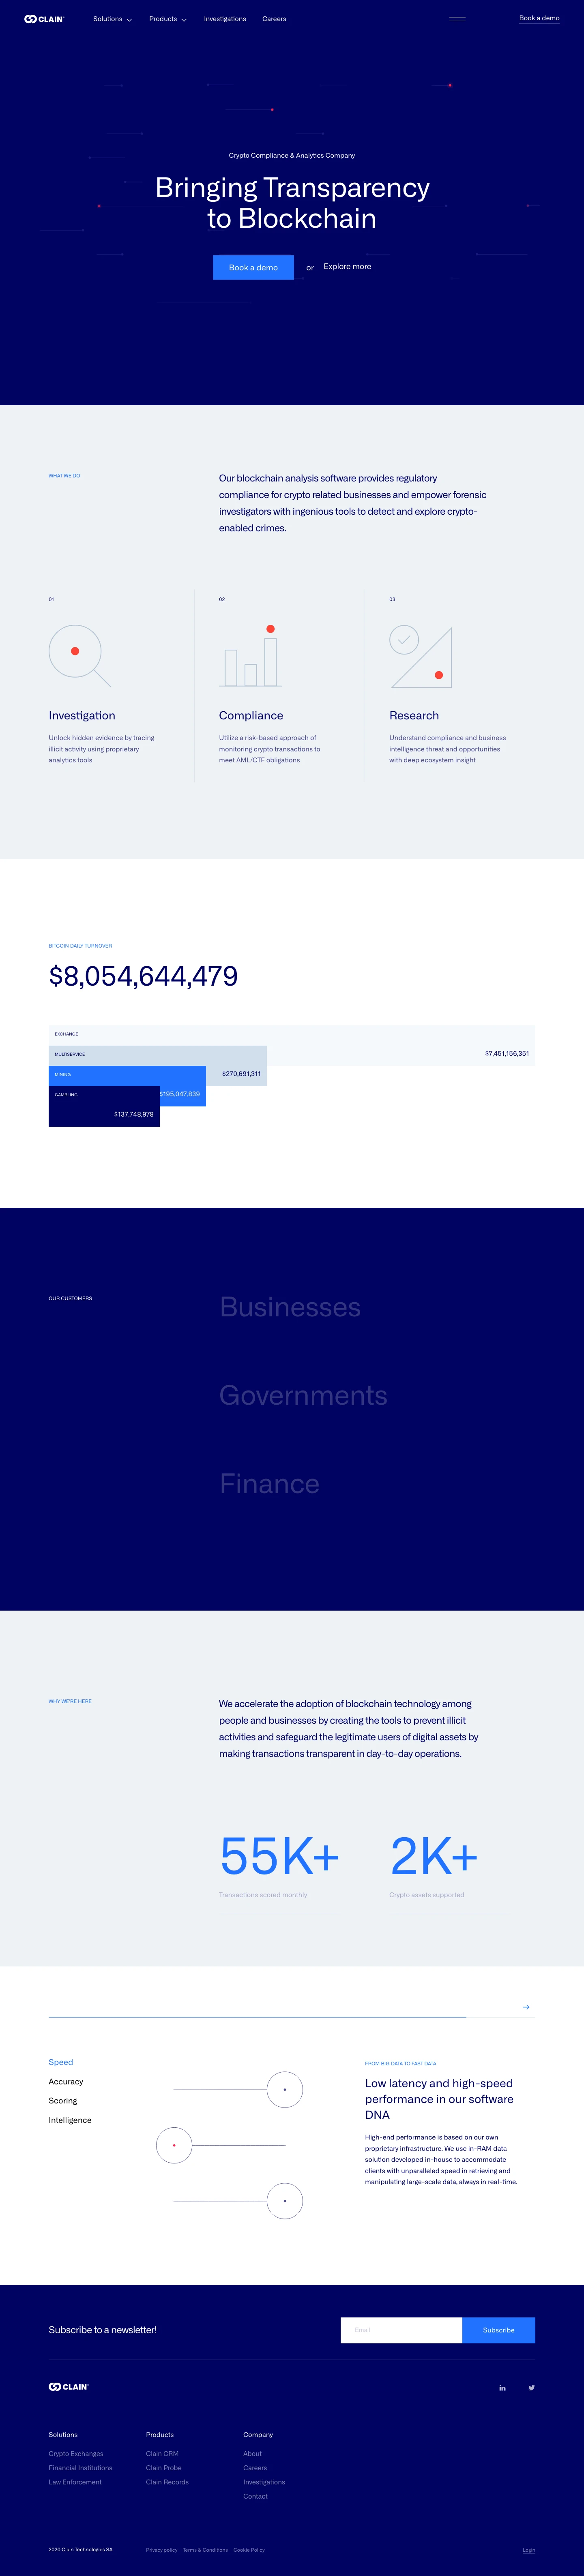 Clain Landing Page Example: Clain provides regulatory compliance for crypto-related businesses and empower forensic investigators with capable tools to detect and explore crypto-enabled crimes